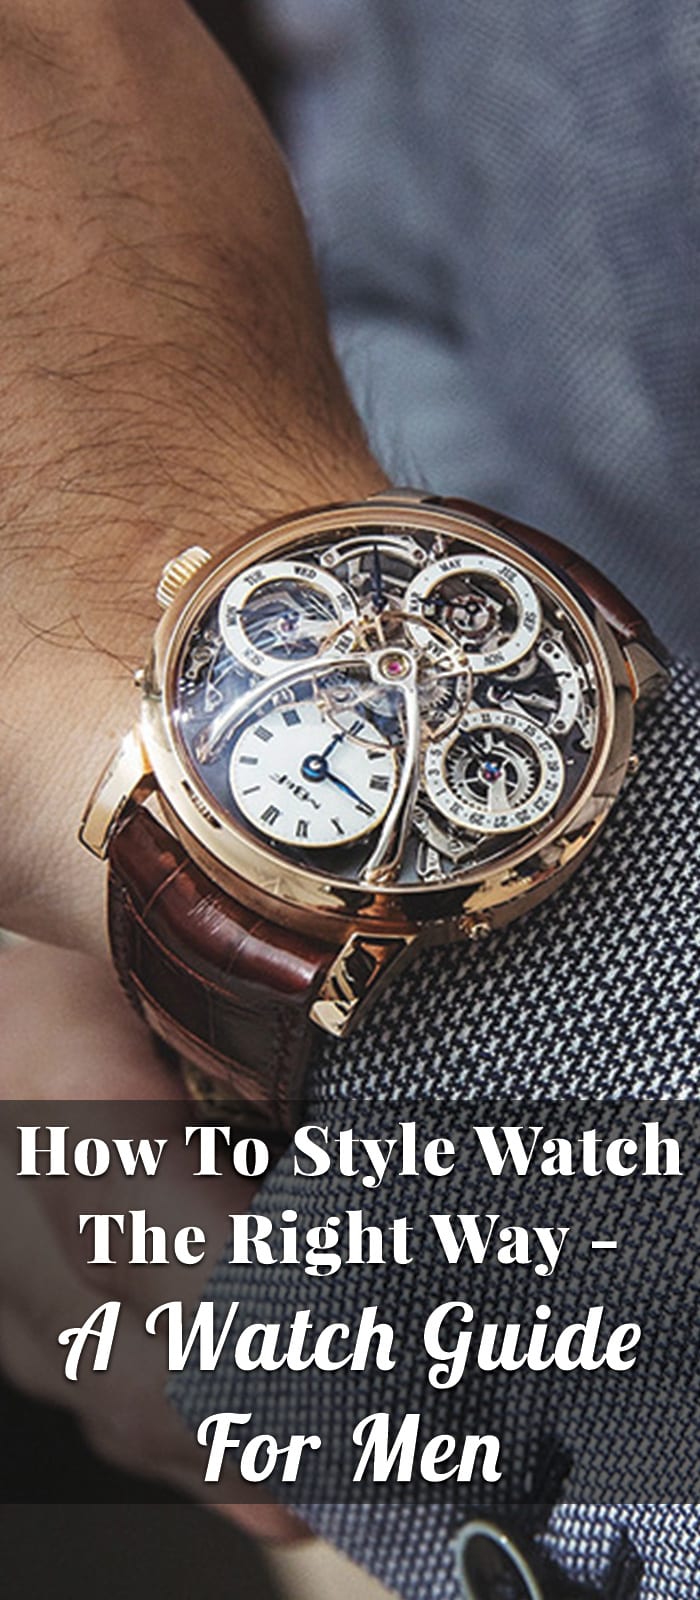 How To Style Watch The Right Way - A Watch Guide For Men